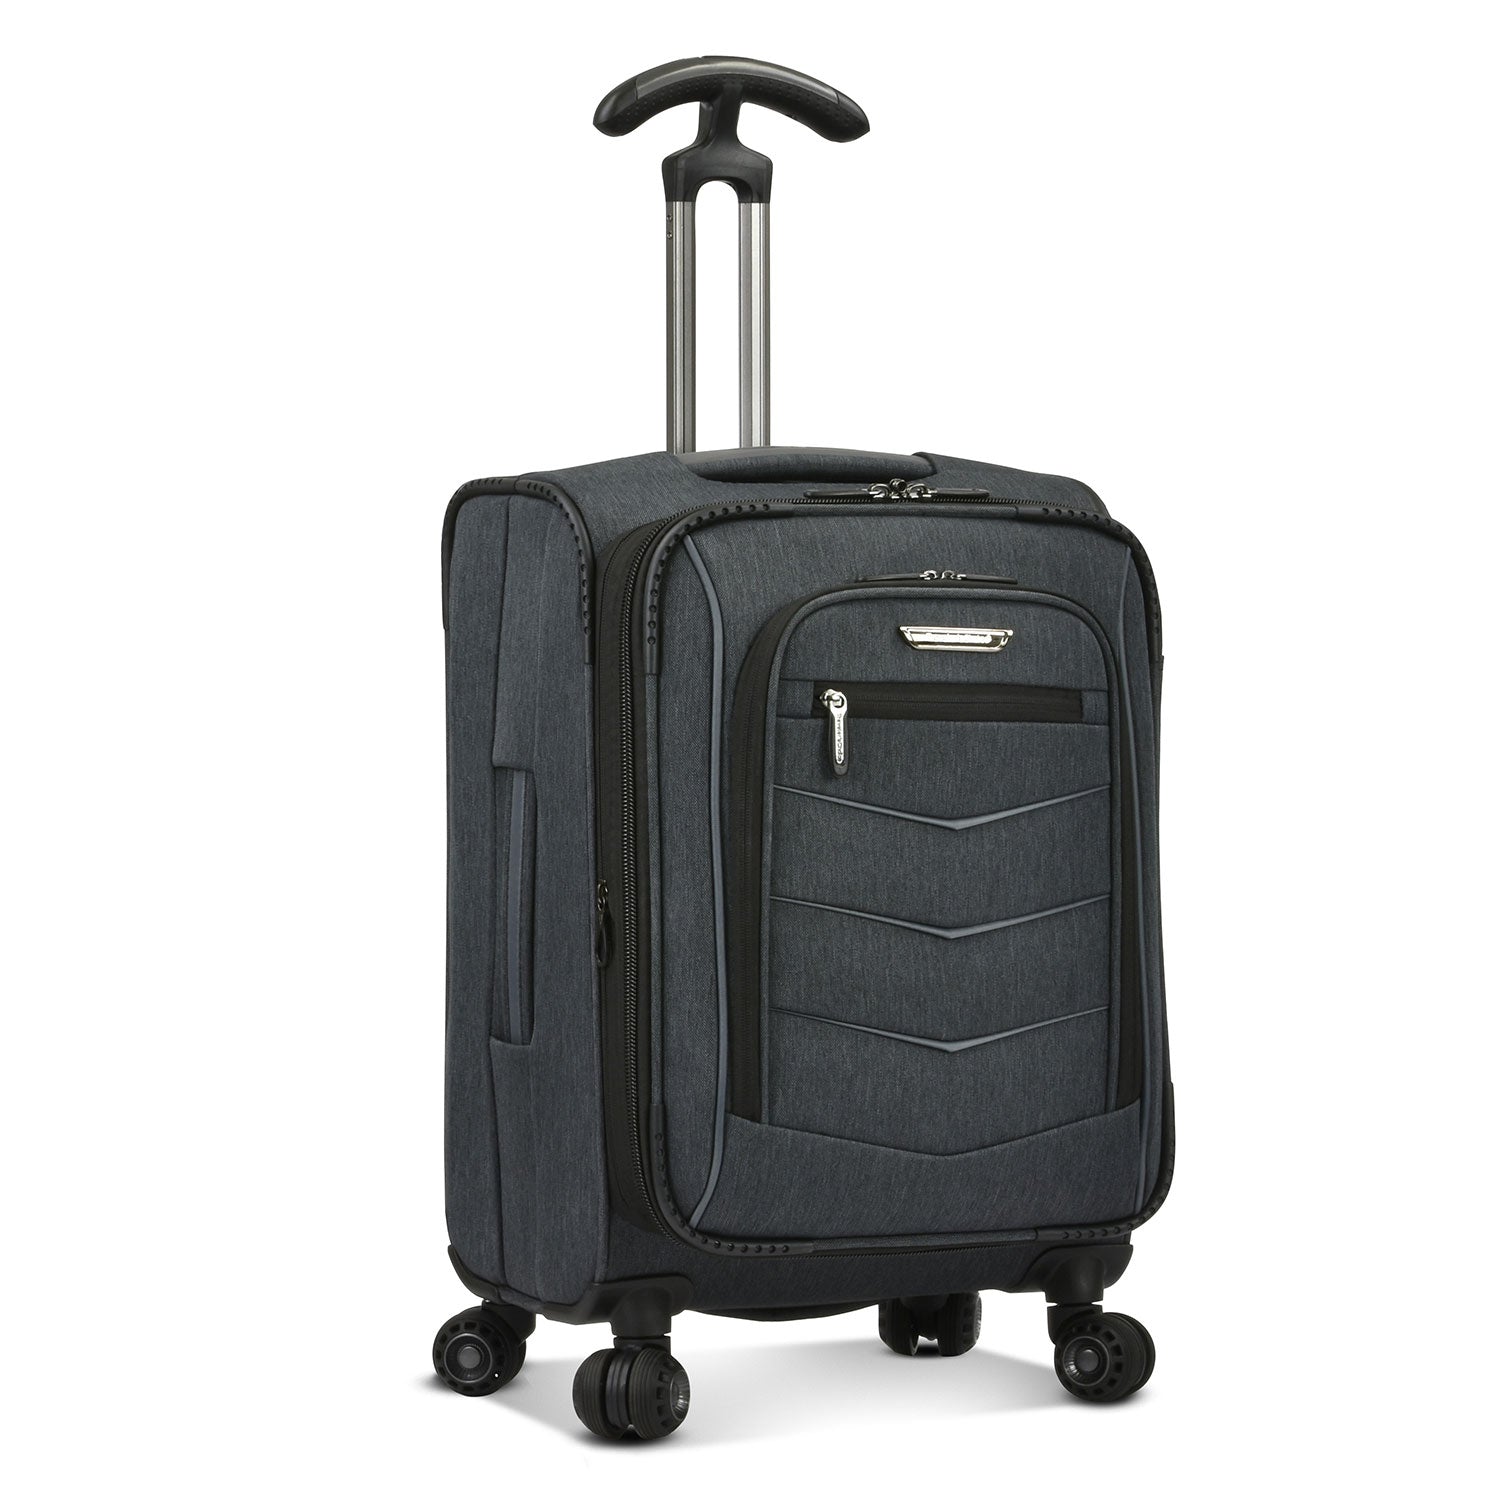 Softside Luggage Collection and Suitcase Sets